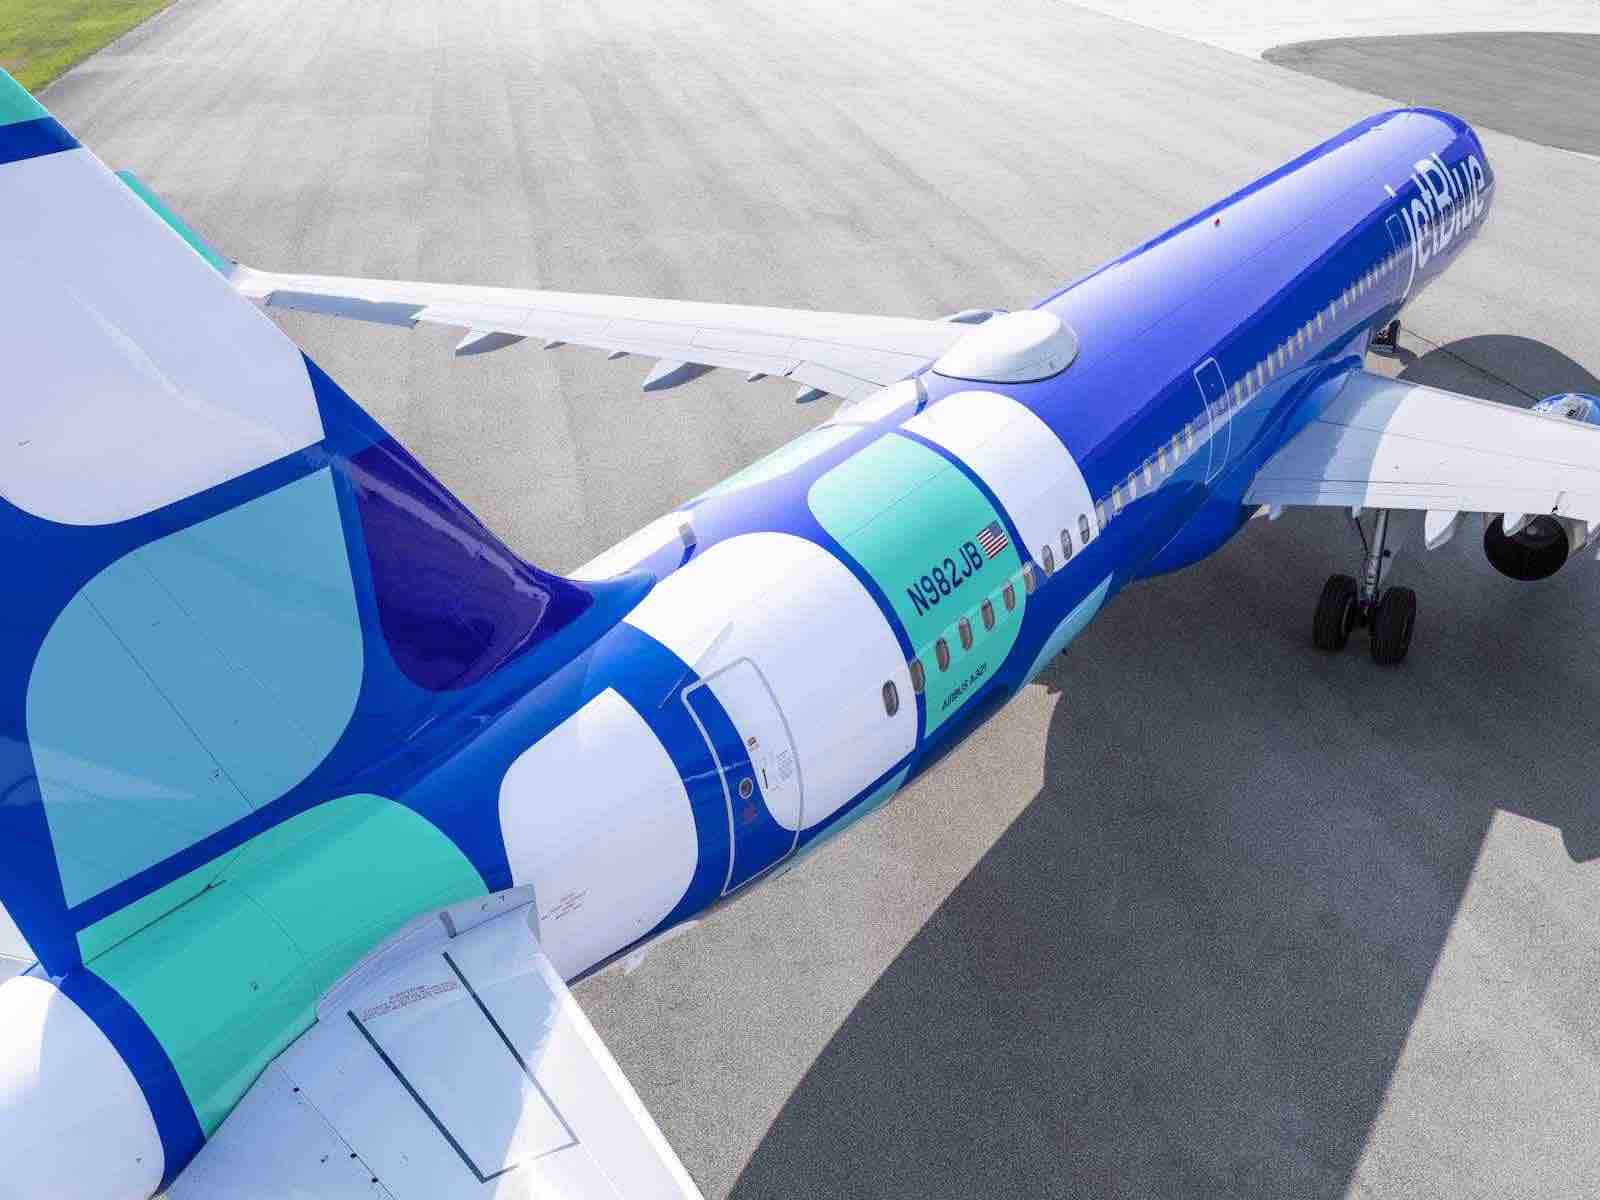 a blue and white airplane